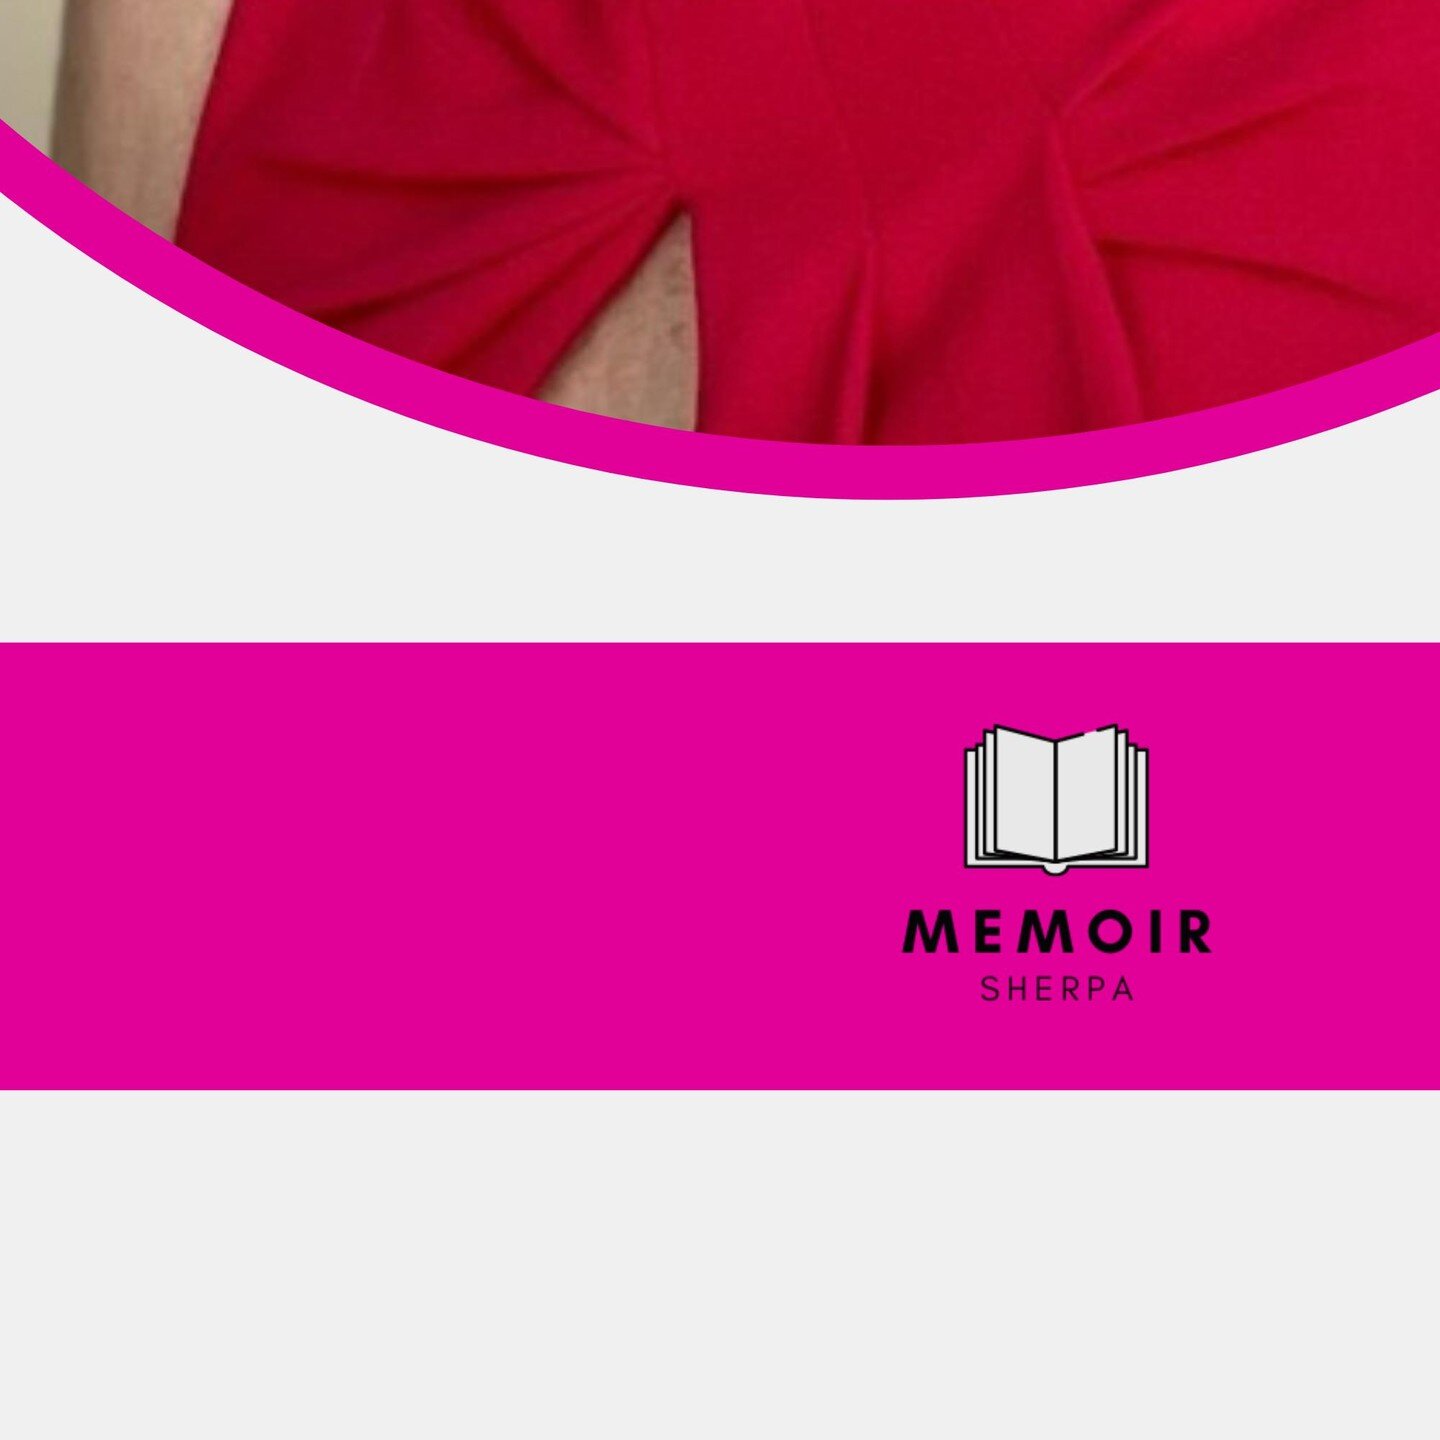 THE MEMOIR SHERPA PROGRAM will set you up with all you need to know about writing, editing, and publishing your memoir. ✍
You will also be connected to a team that can help you and a wonderful community that will support you on this journey. With Nat